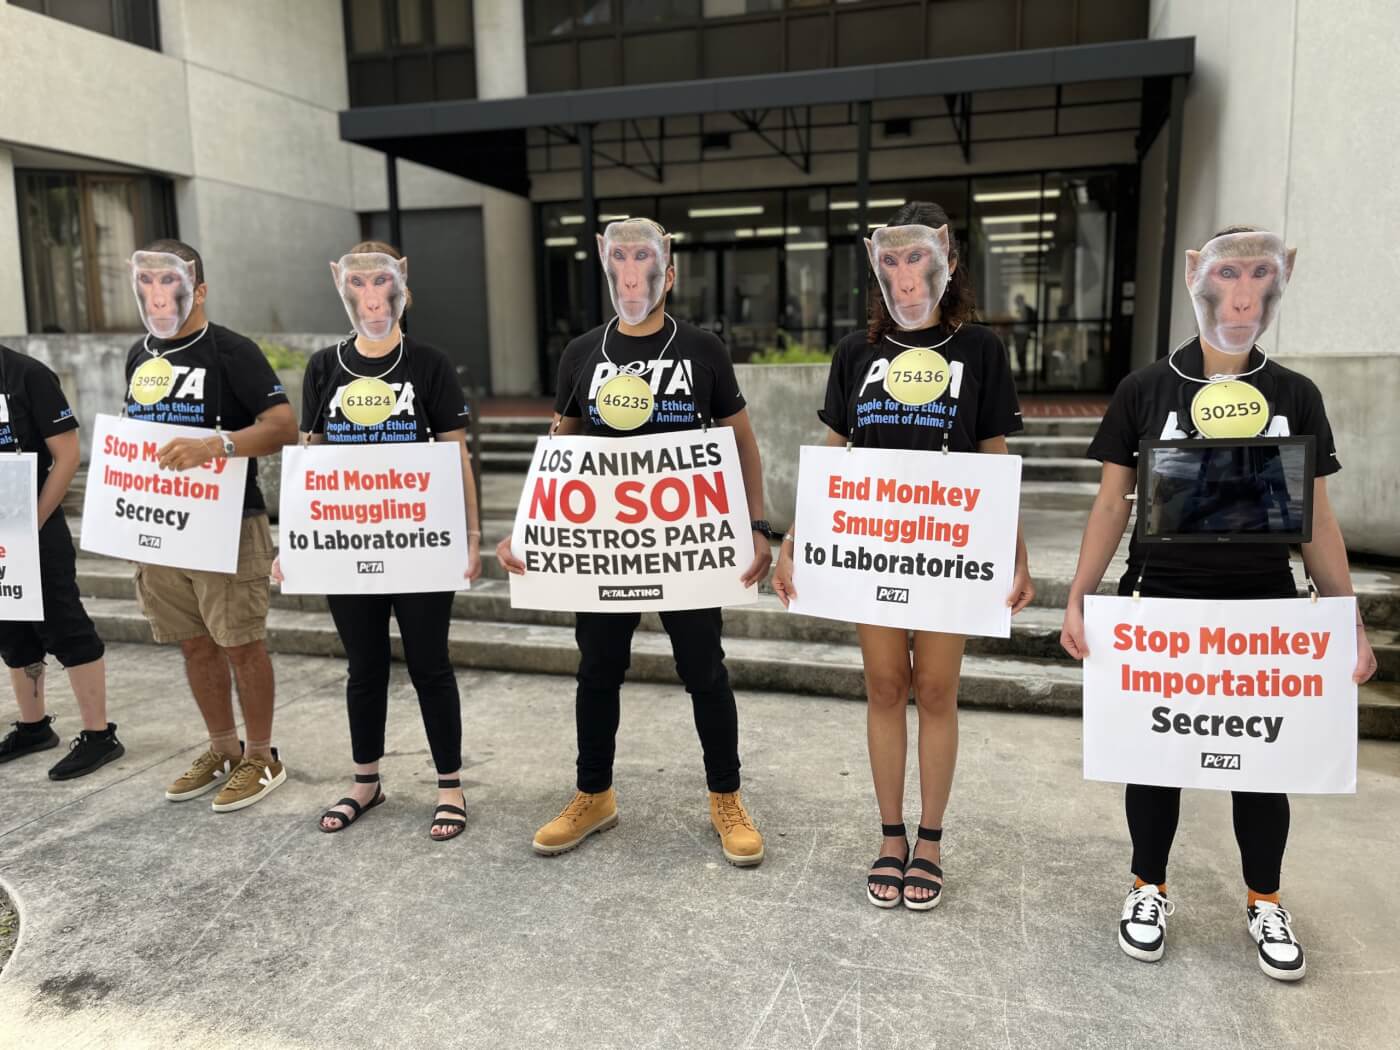 Five PETA protesters stand in a line holding signs reading "Stop Monkey Importation", "Los Animales no son nuestros para experimentar", and "End Monkey Smuggling"